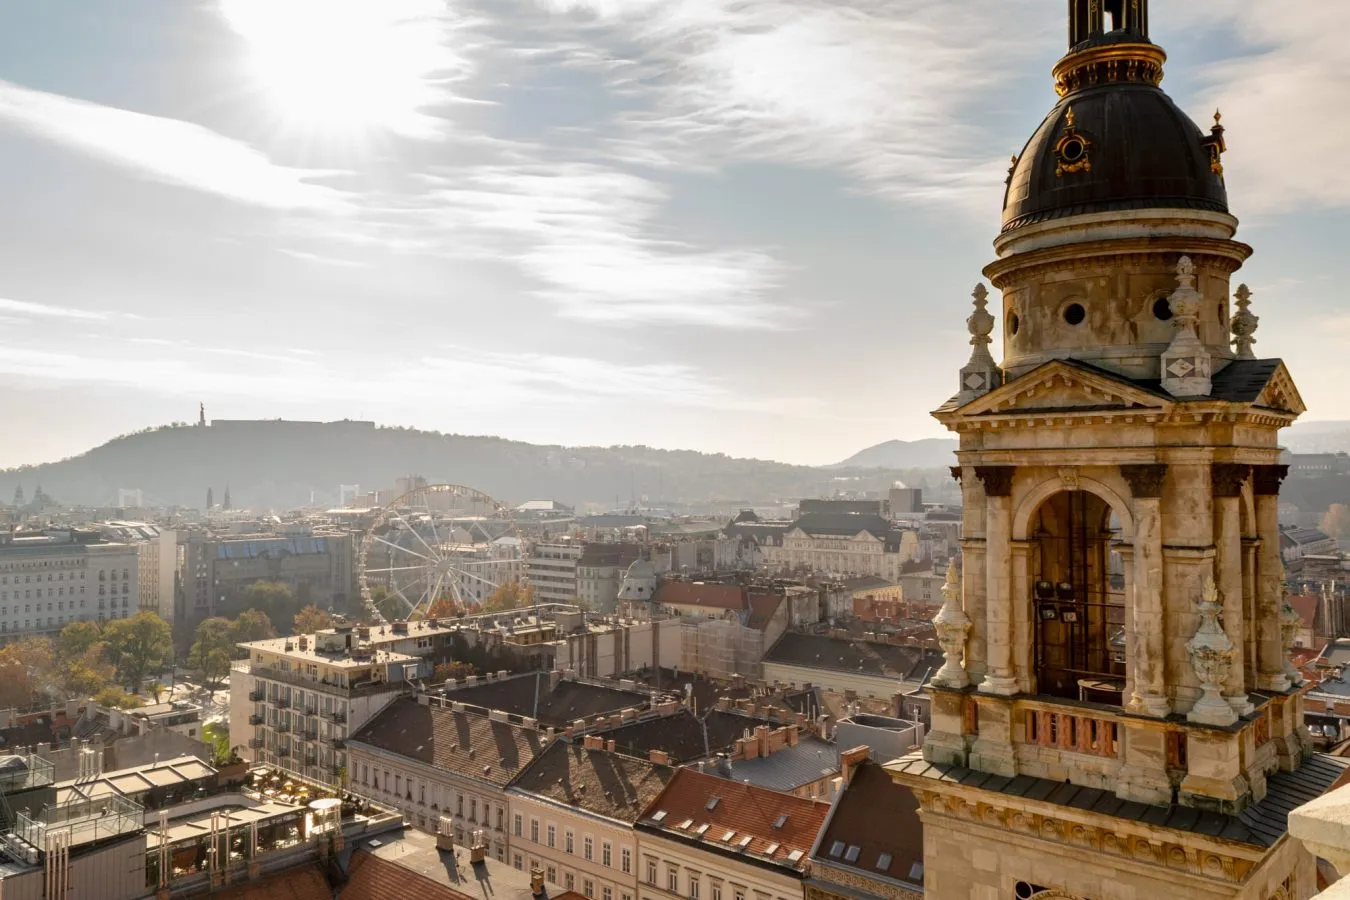 View of Budapest from St Stephen's Basilica in Budapest in November, with bell tower of cathedral on the right.